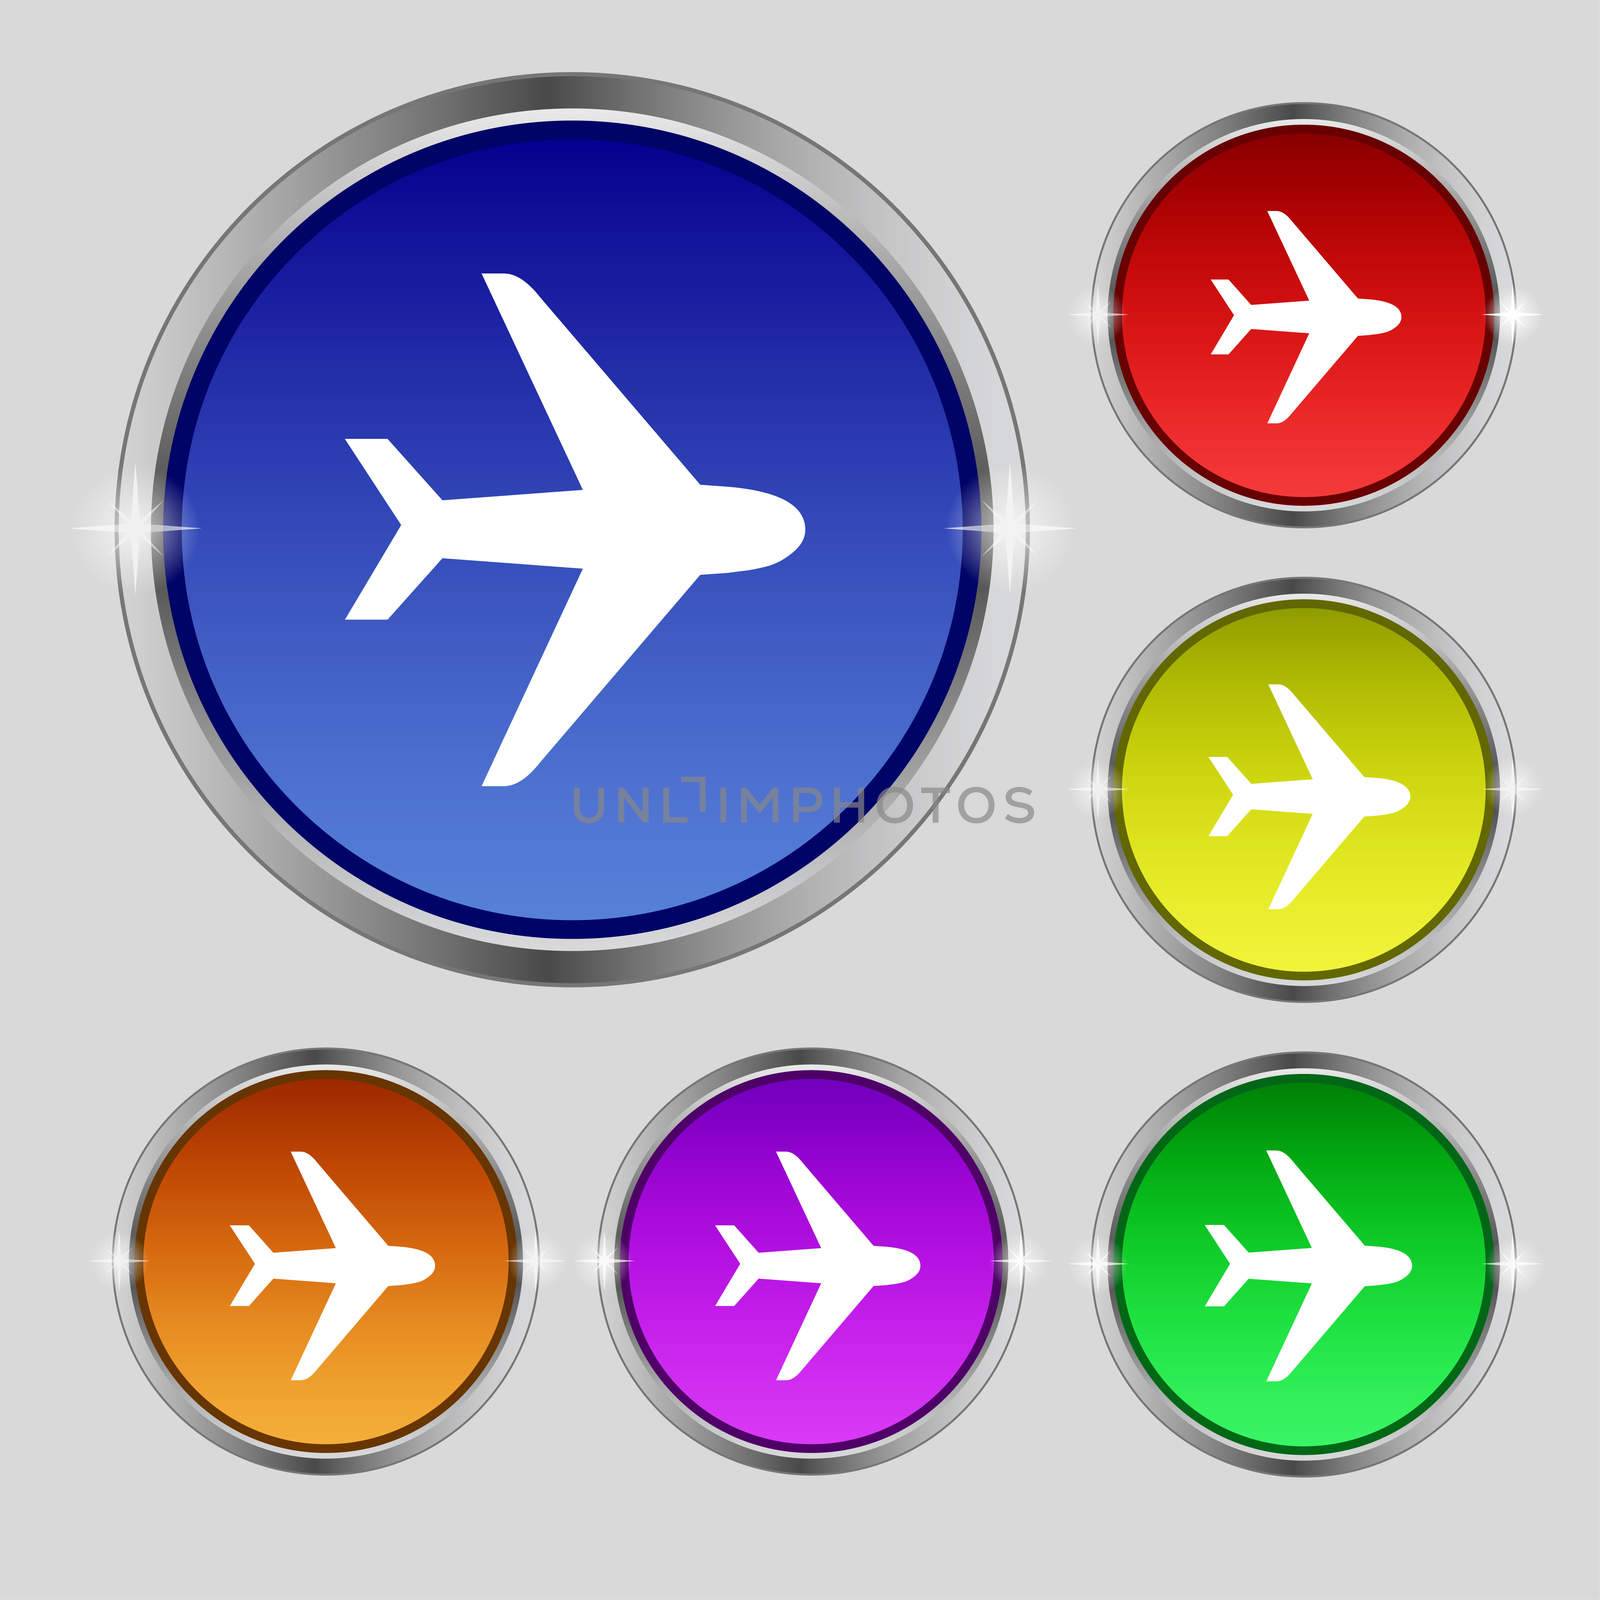 Plane icon sign. Round symbol on bright colourful buttons. illustration